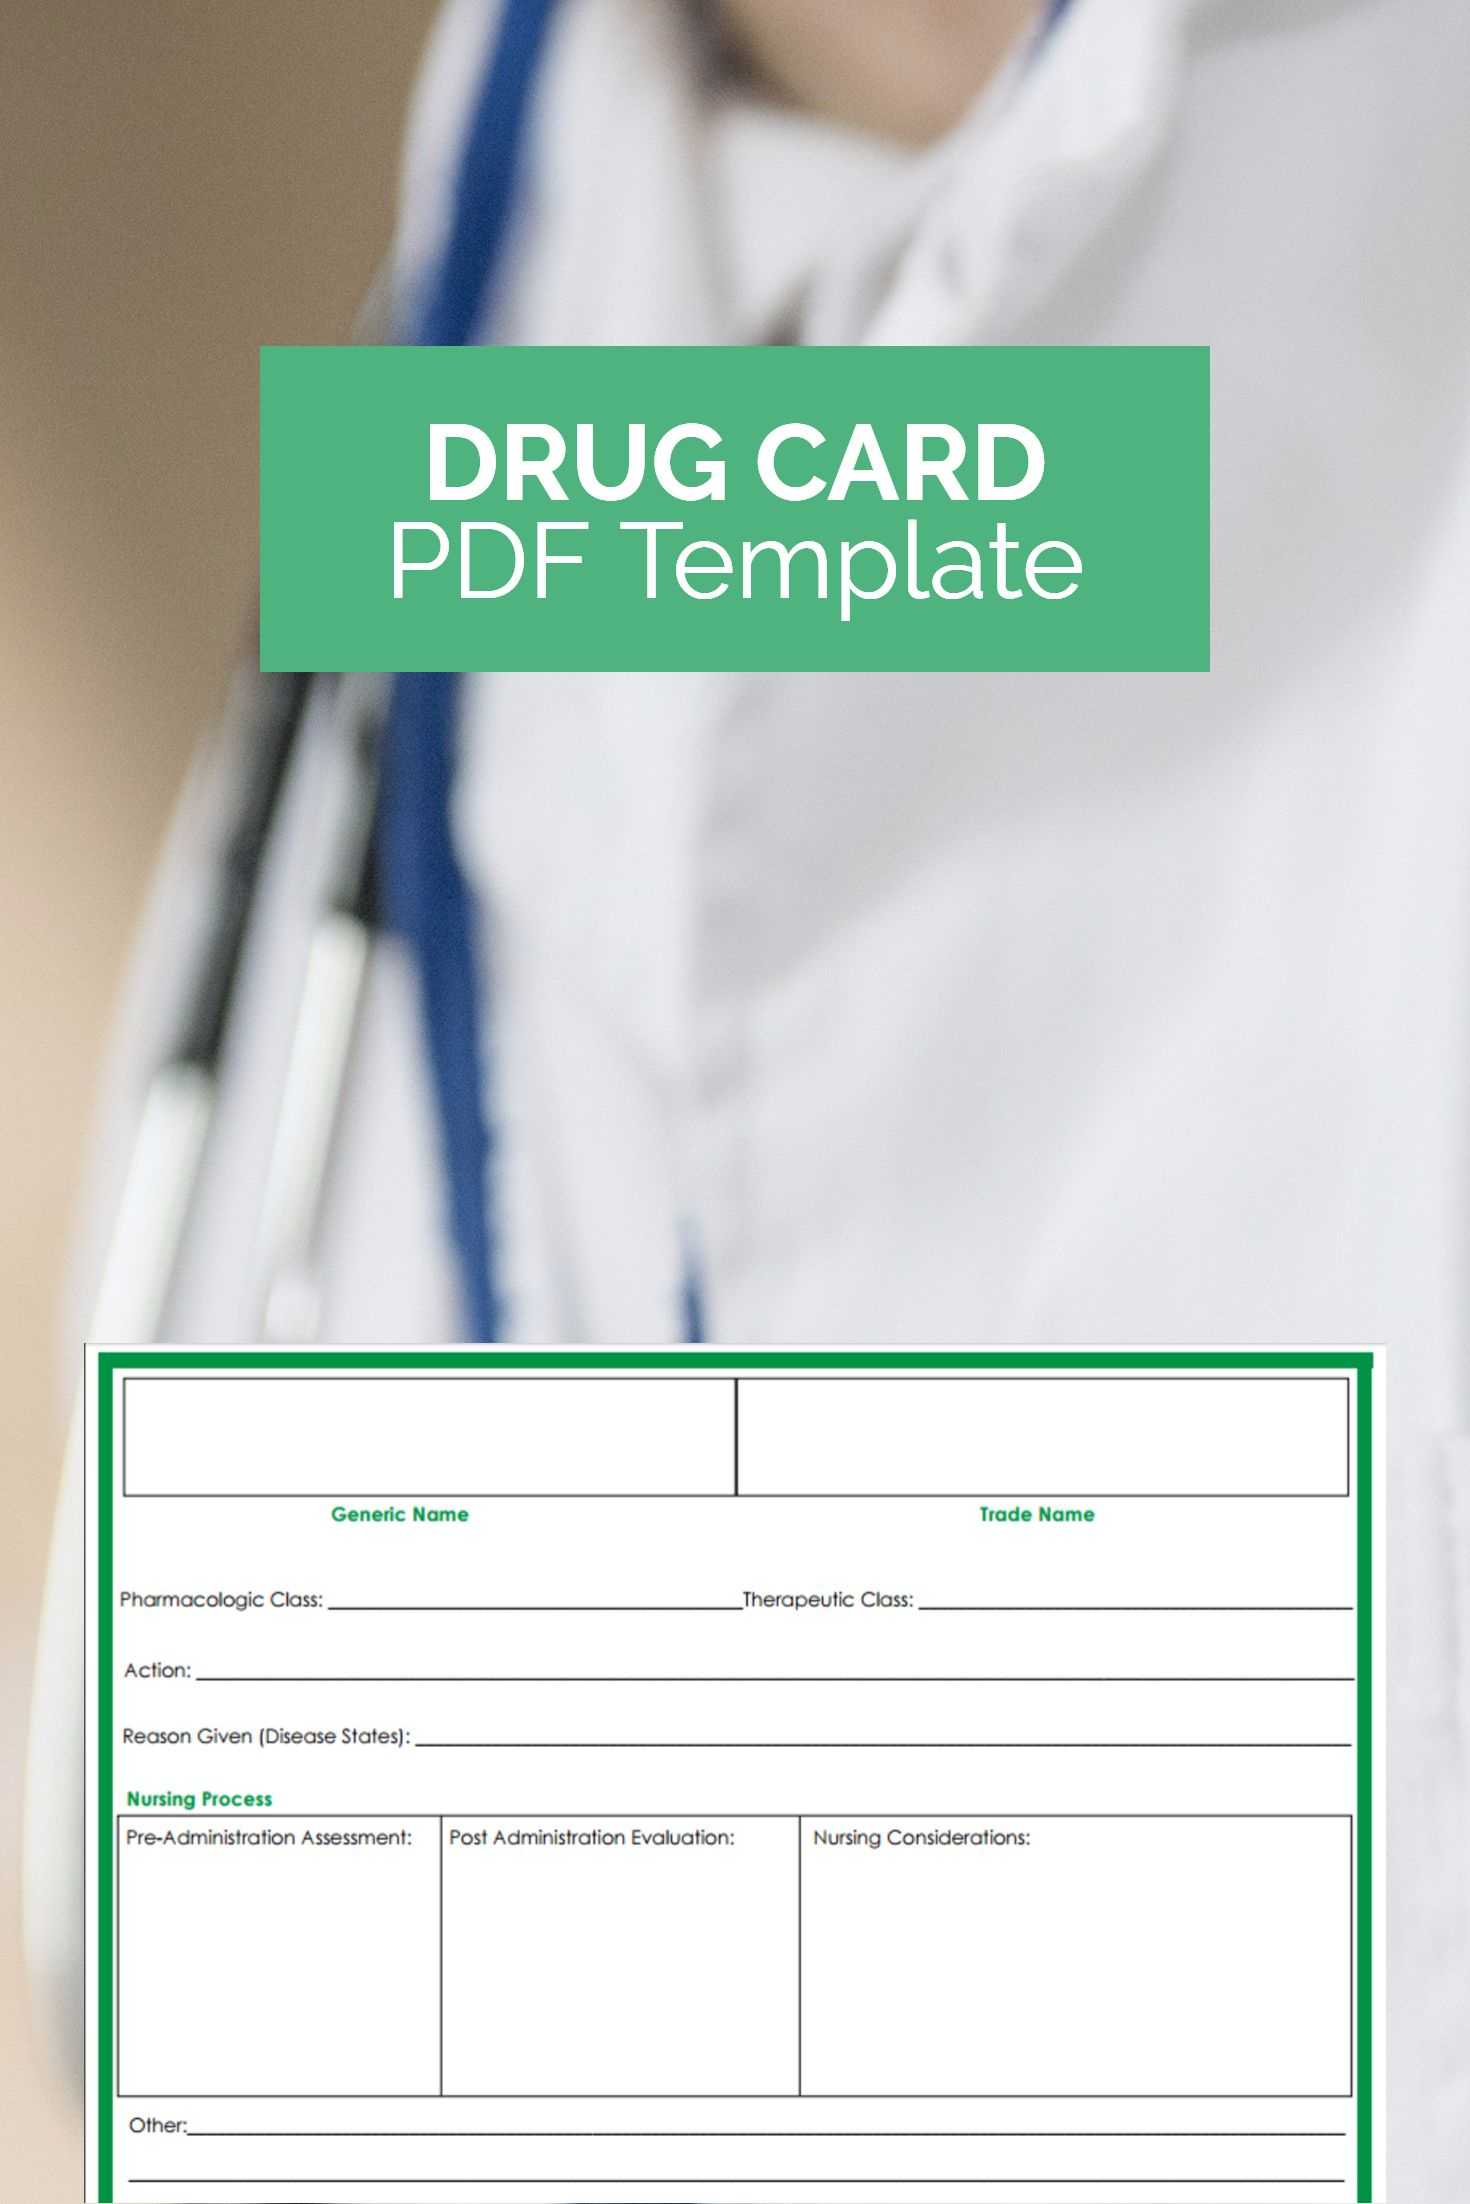 Want A Free Drug Card Template That Can Make Studying Much Intended For Pharmacology Drug Card Template